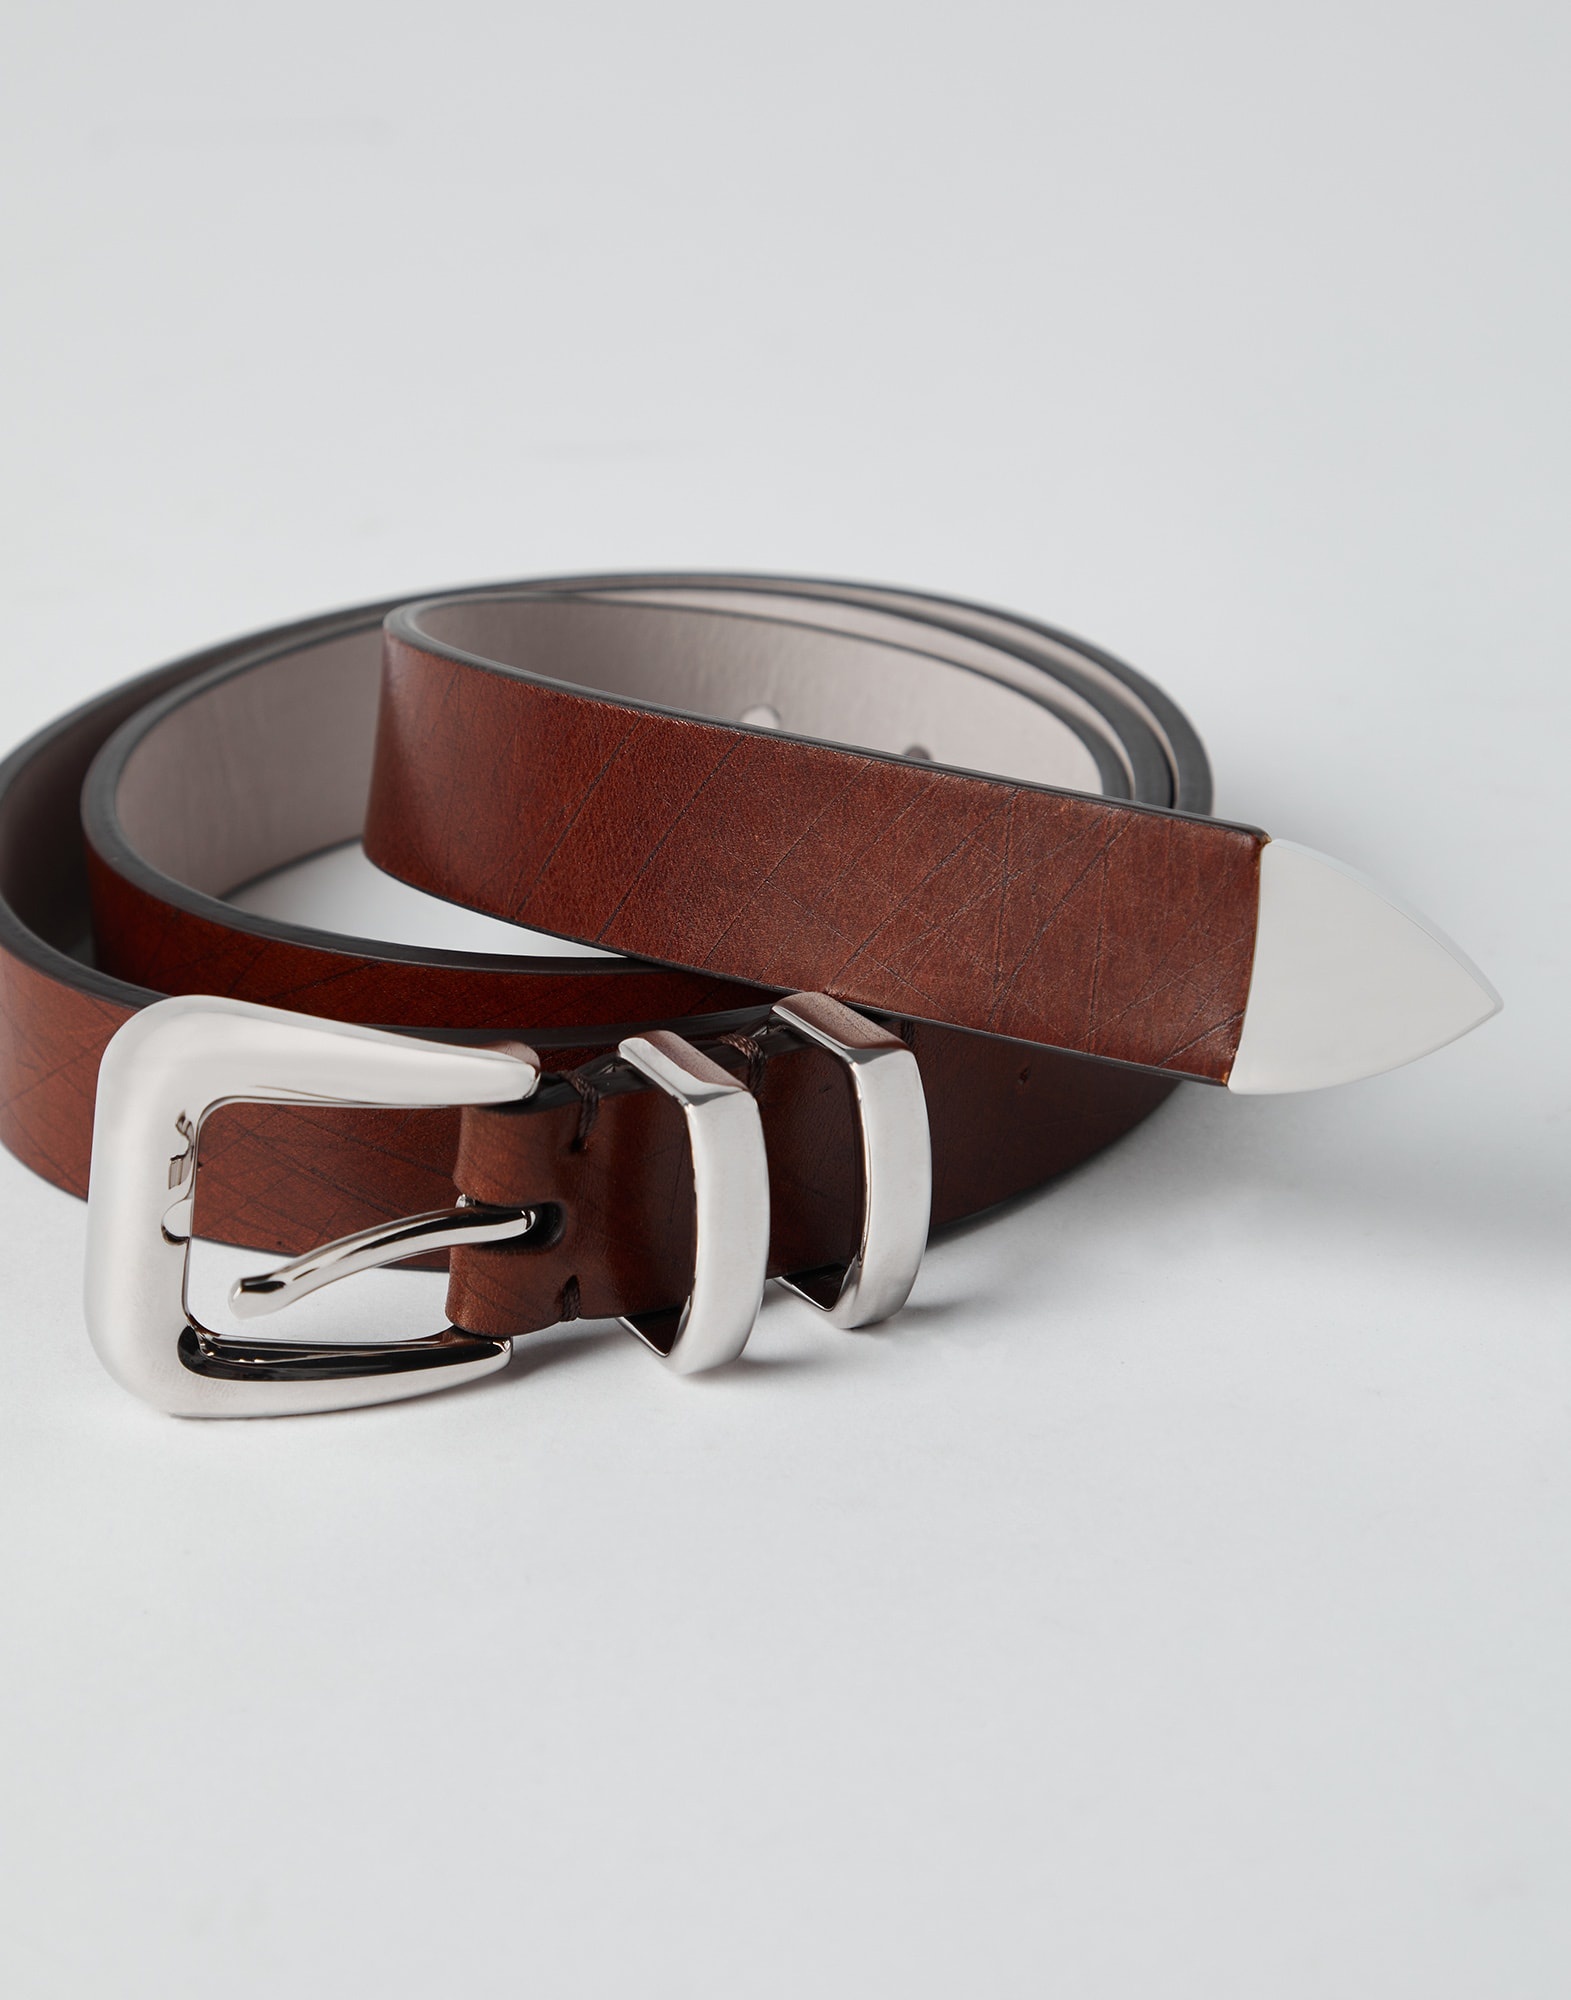 Etched leather belt with double keeper and tip - 2